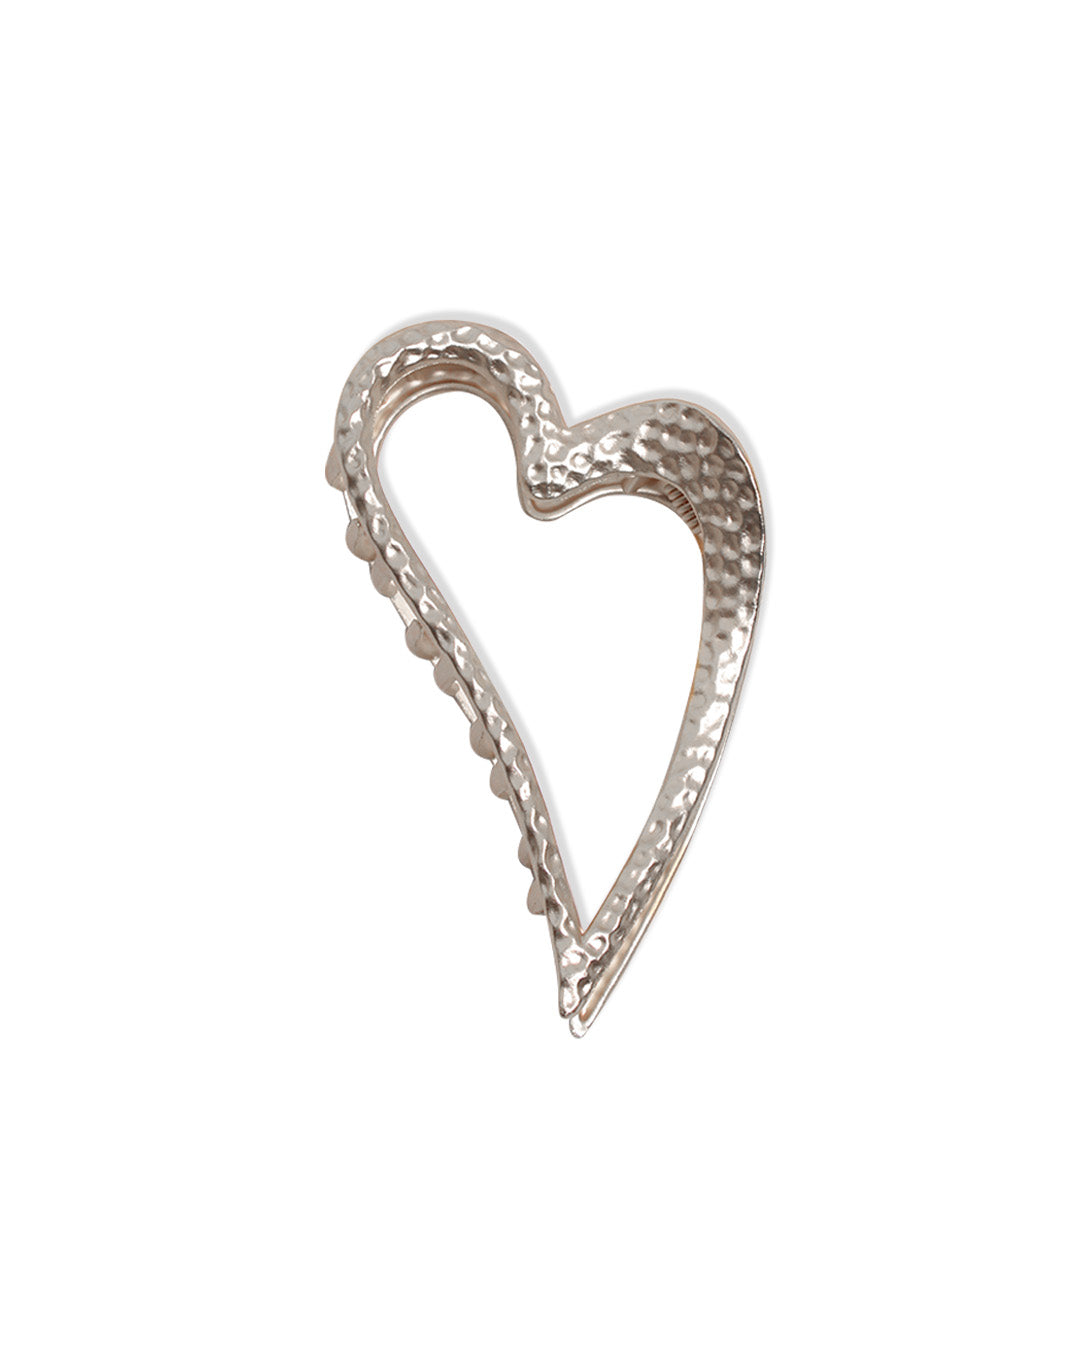 Hammered Heart Claw Clip